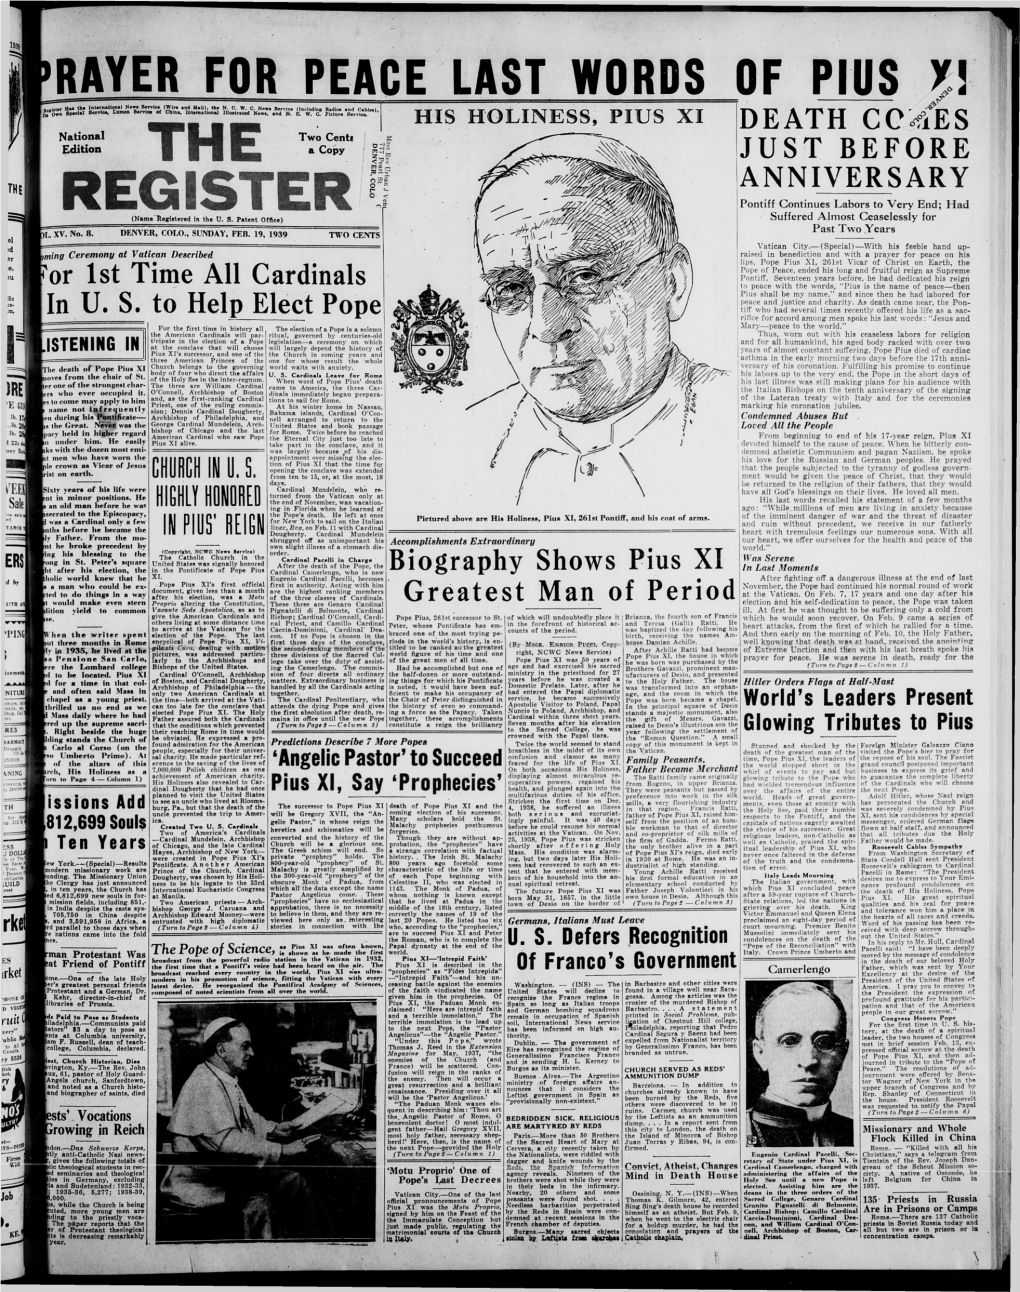 HIS HOLINESS, PIUS XI DEATH Ccfies National Two Centf S Edition the a Copy Nr!" ’J U S T B E F O R E a N .;